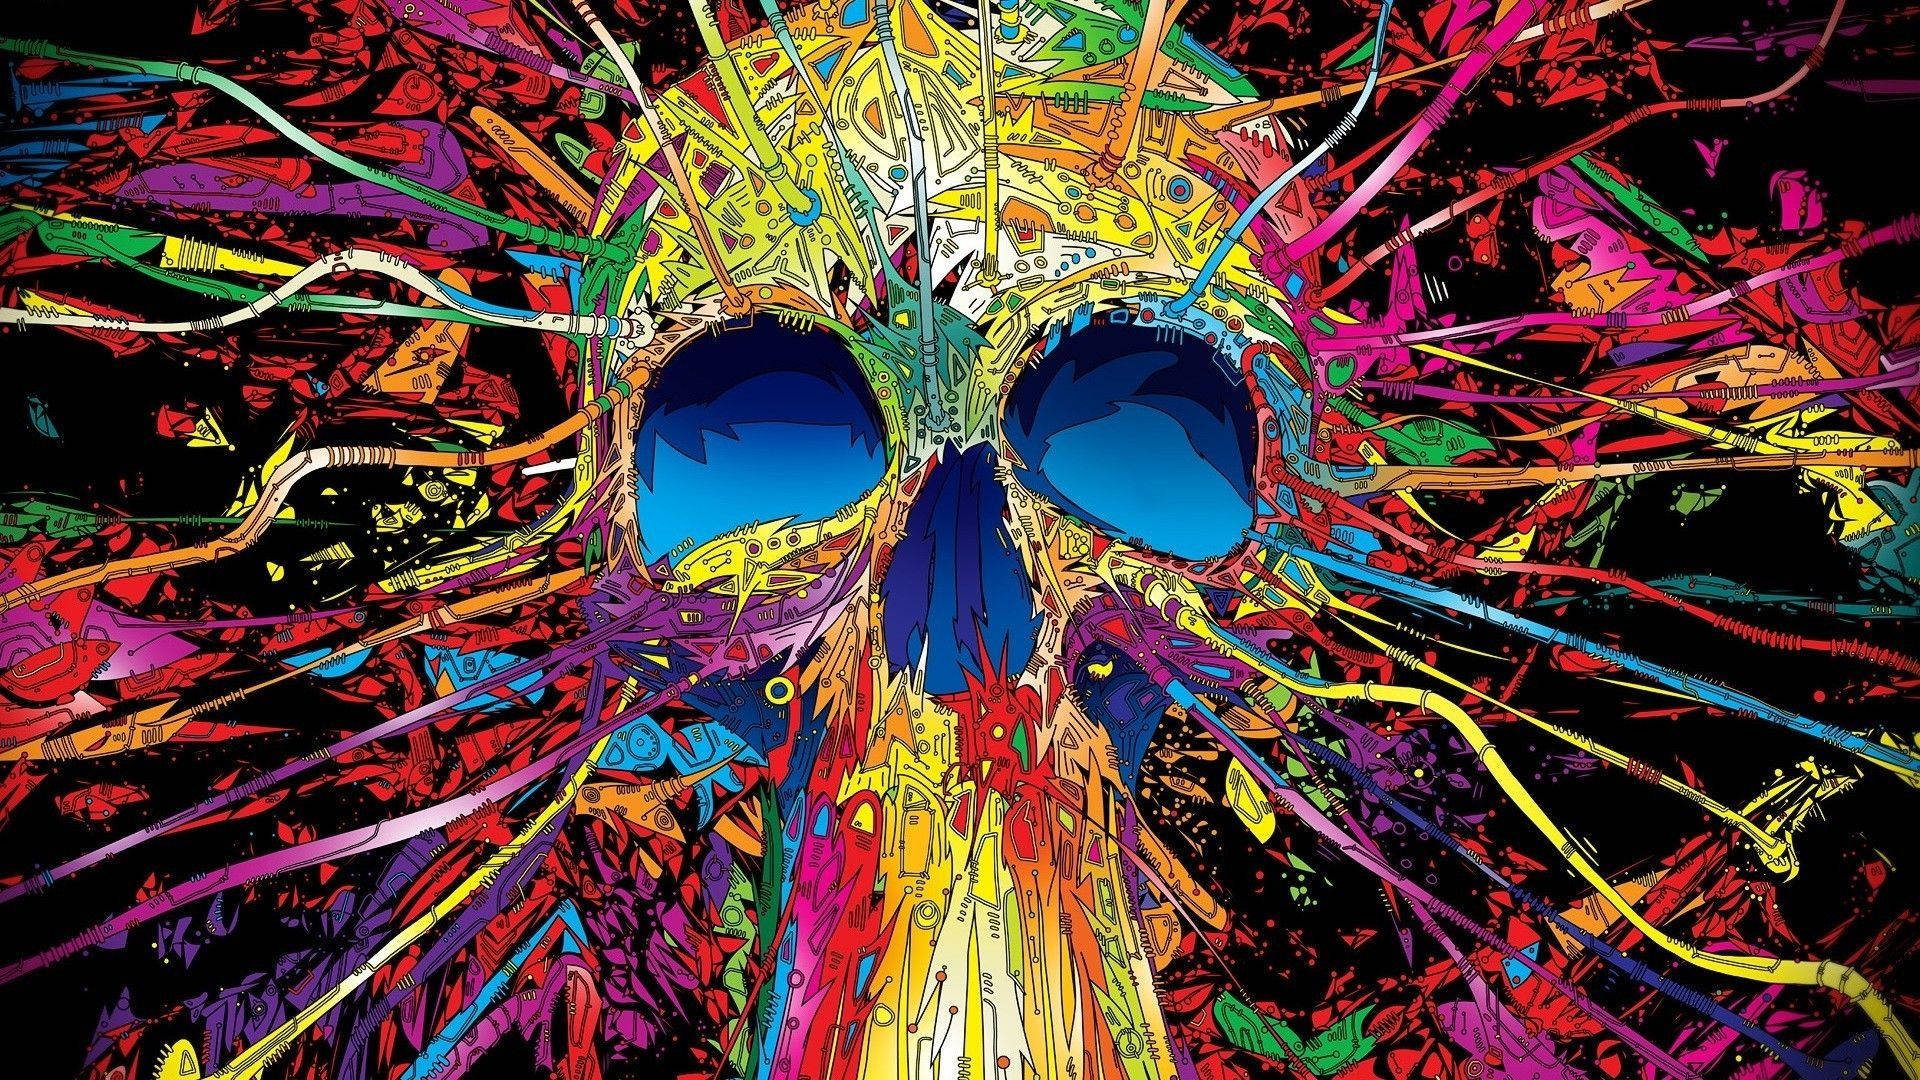 Striking skull with wires psychedelic art wallpaper.